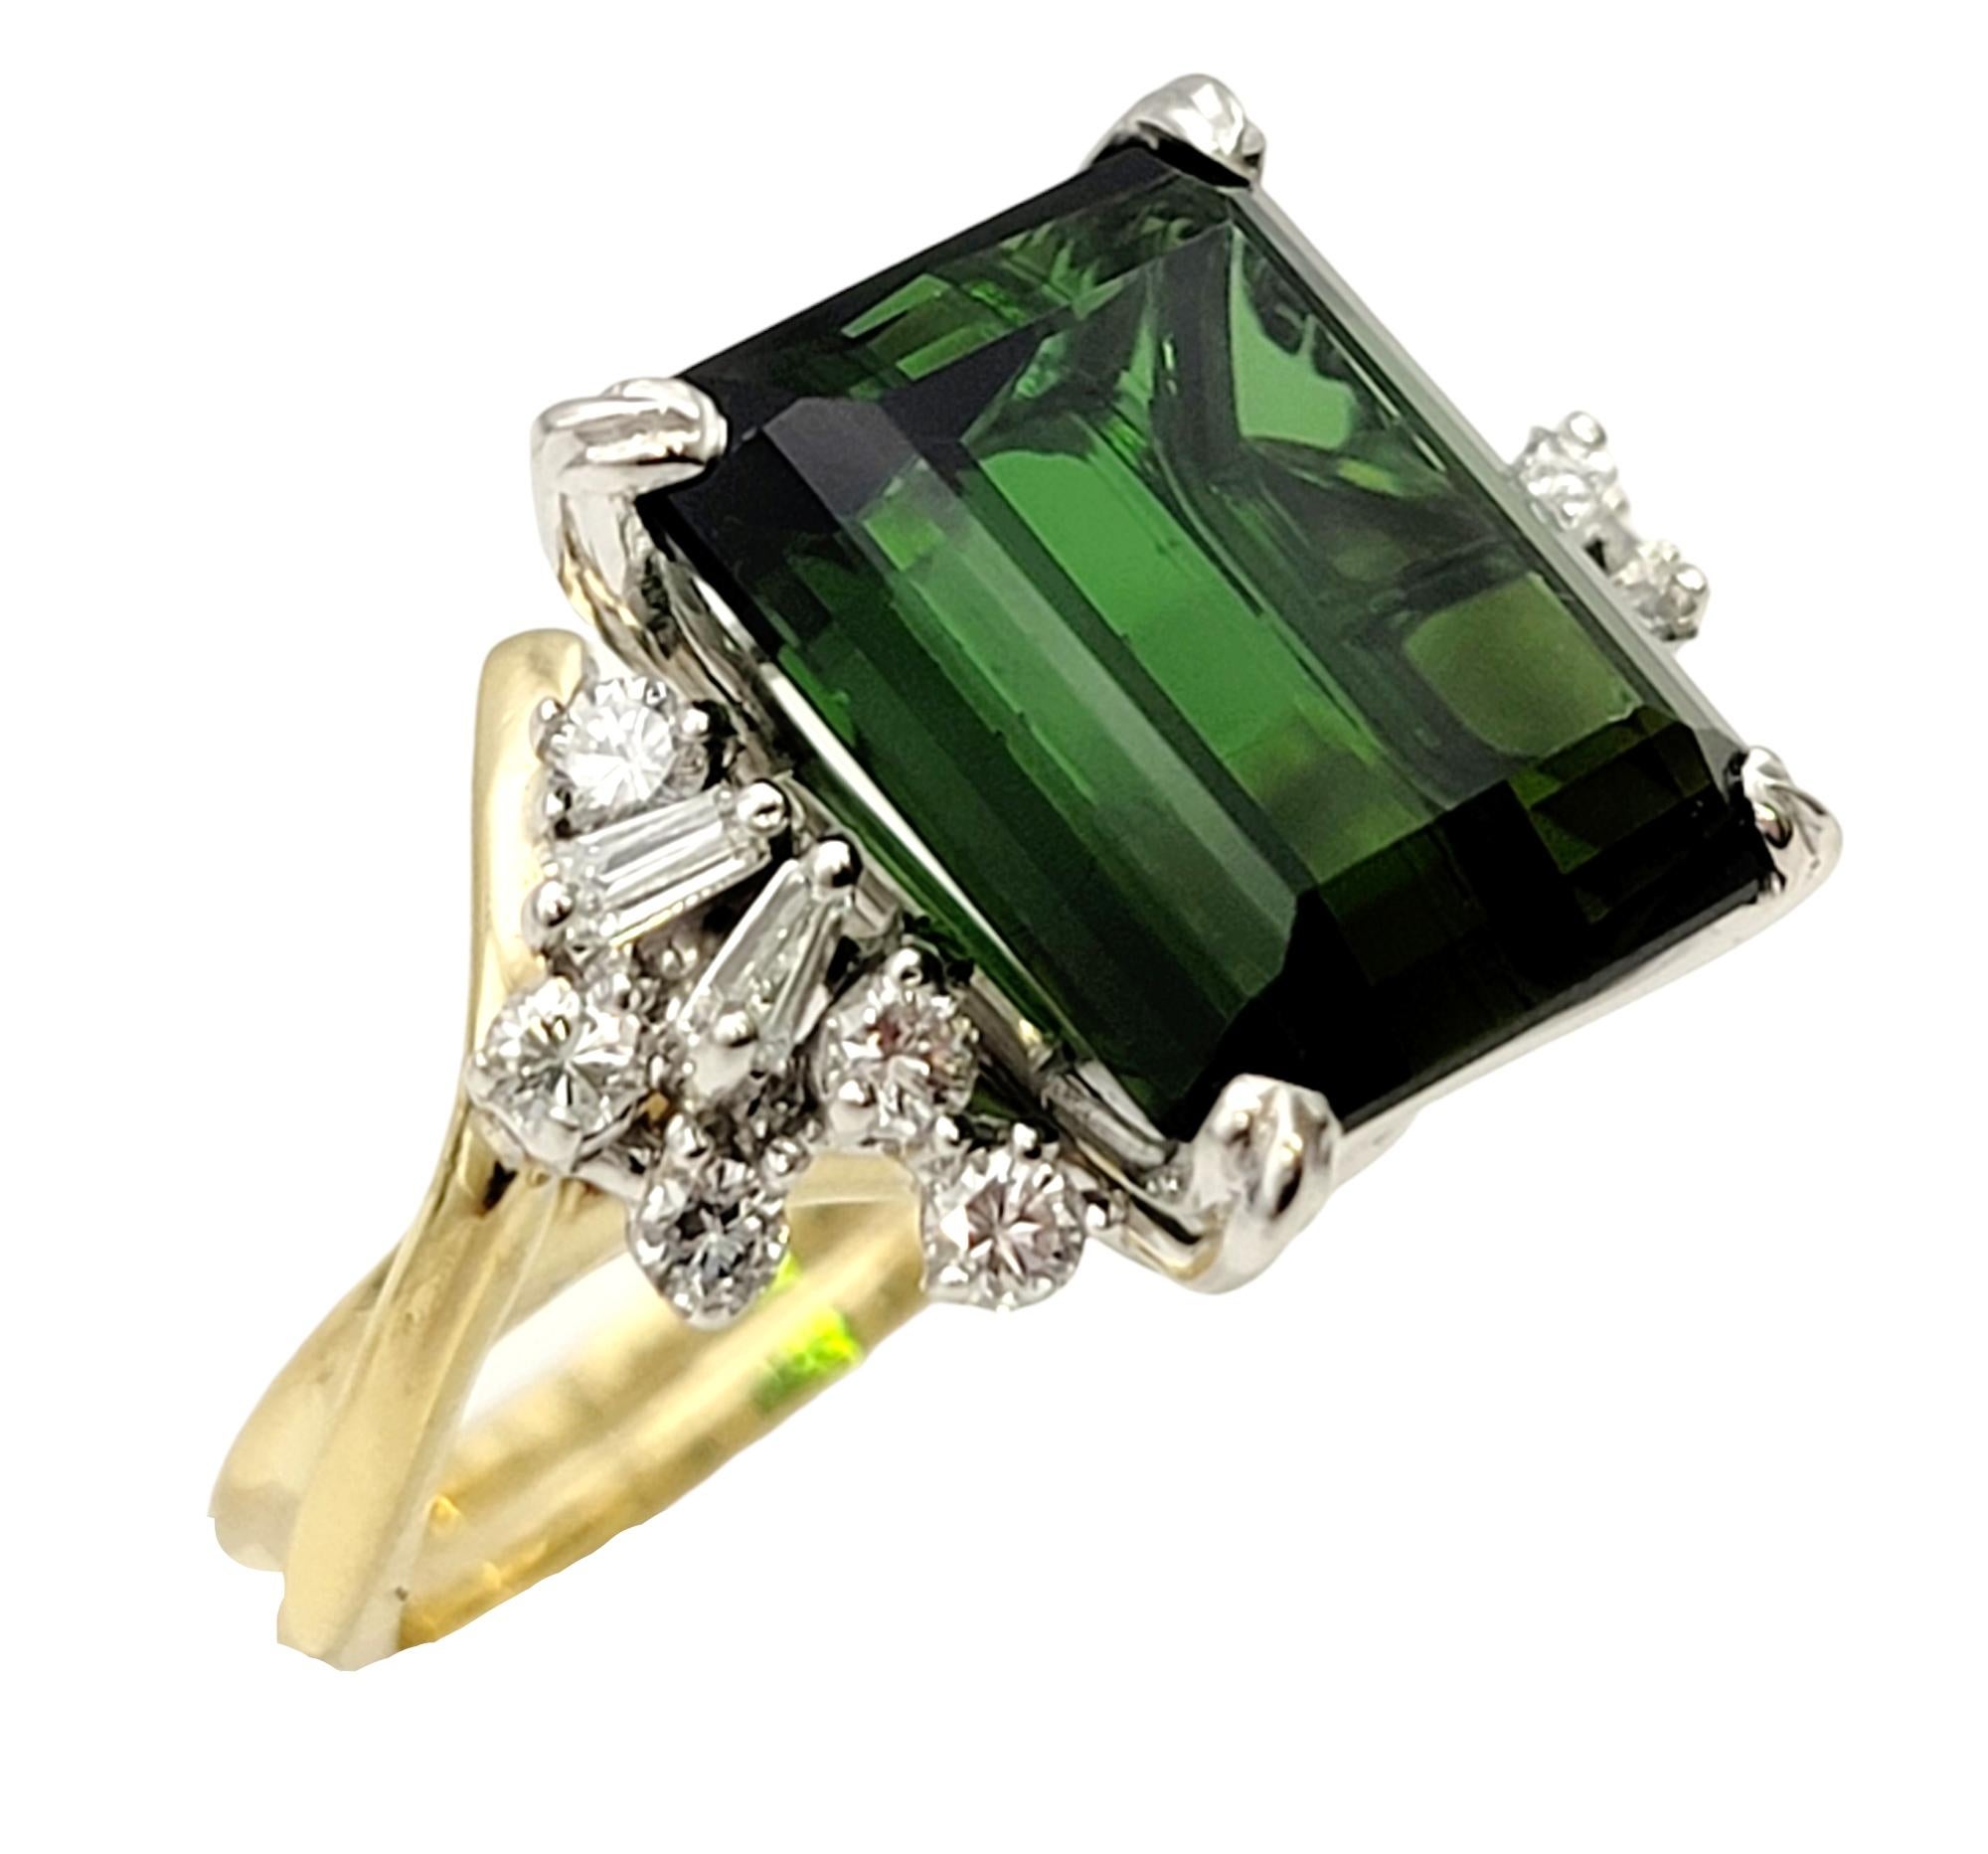 8.10 Carat Emerald Cut Green Tourmaline and Diamond Cocktail Ring 18 Karat Gold In Good Condition For Sale In Scottsdale, AZ